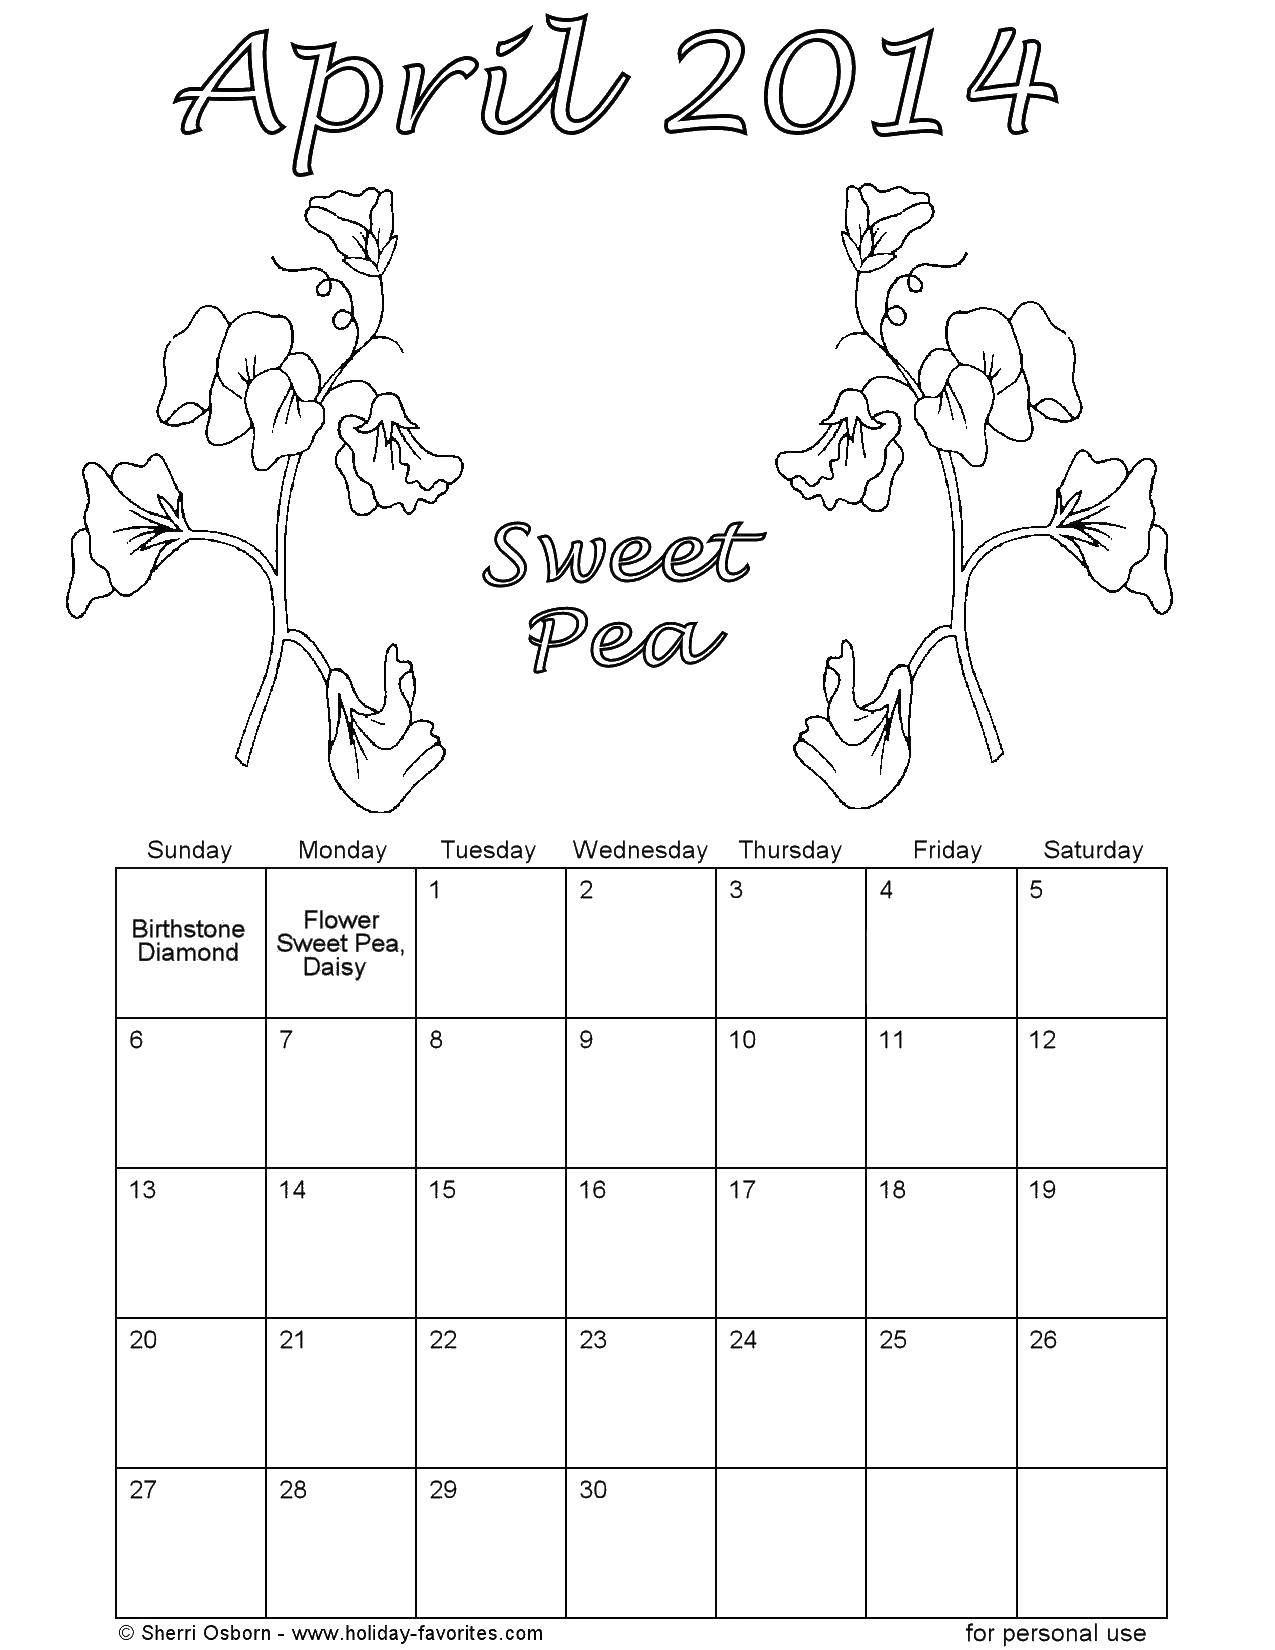 Coloring April and flowers. Category Calendar. Tags:  April flowers.